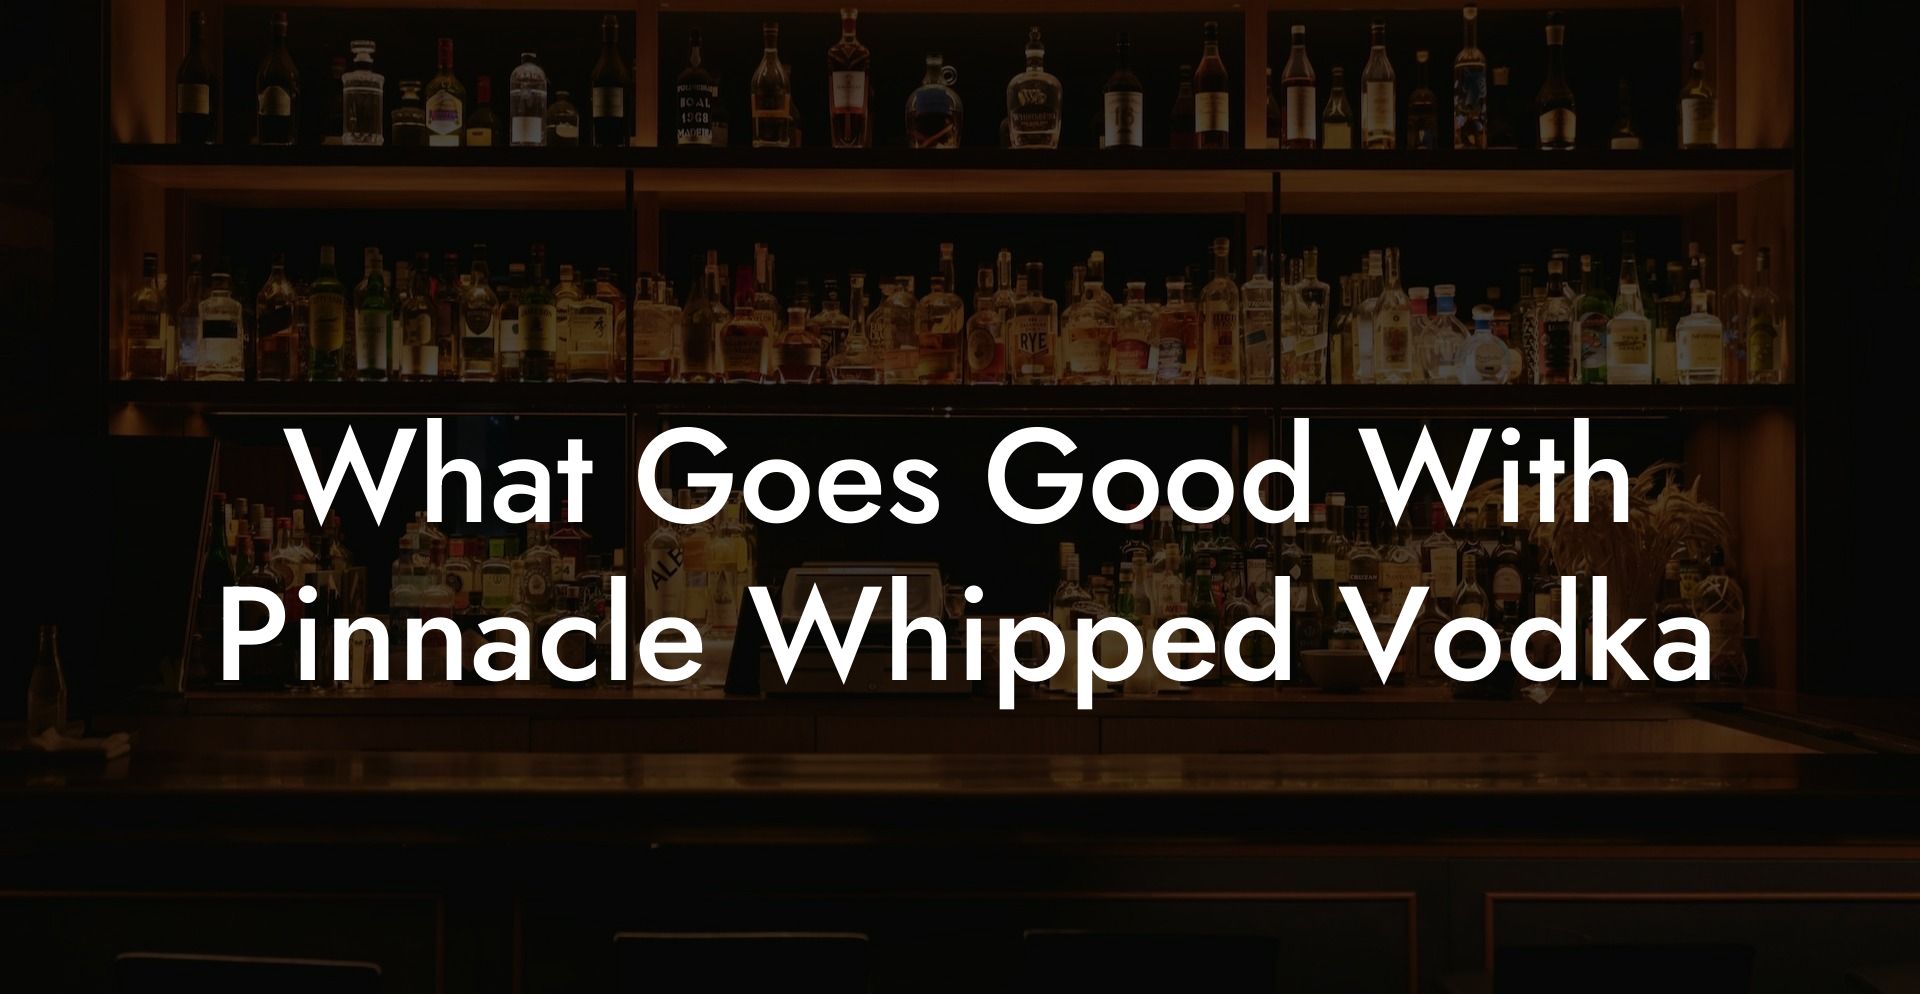 What Goes Good With Pinnacle Whipped Vodka